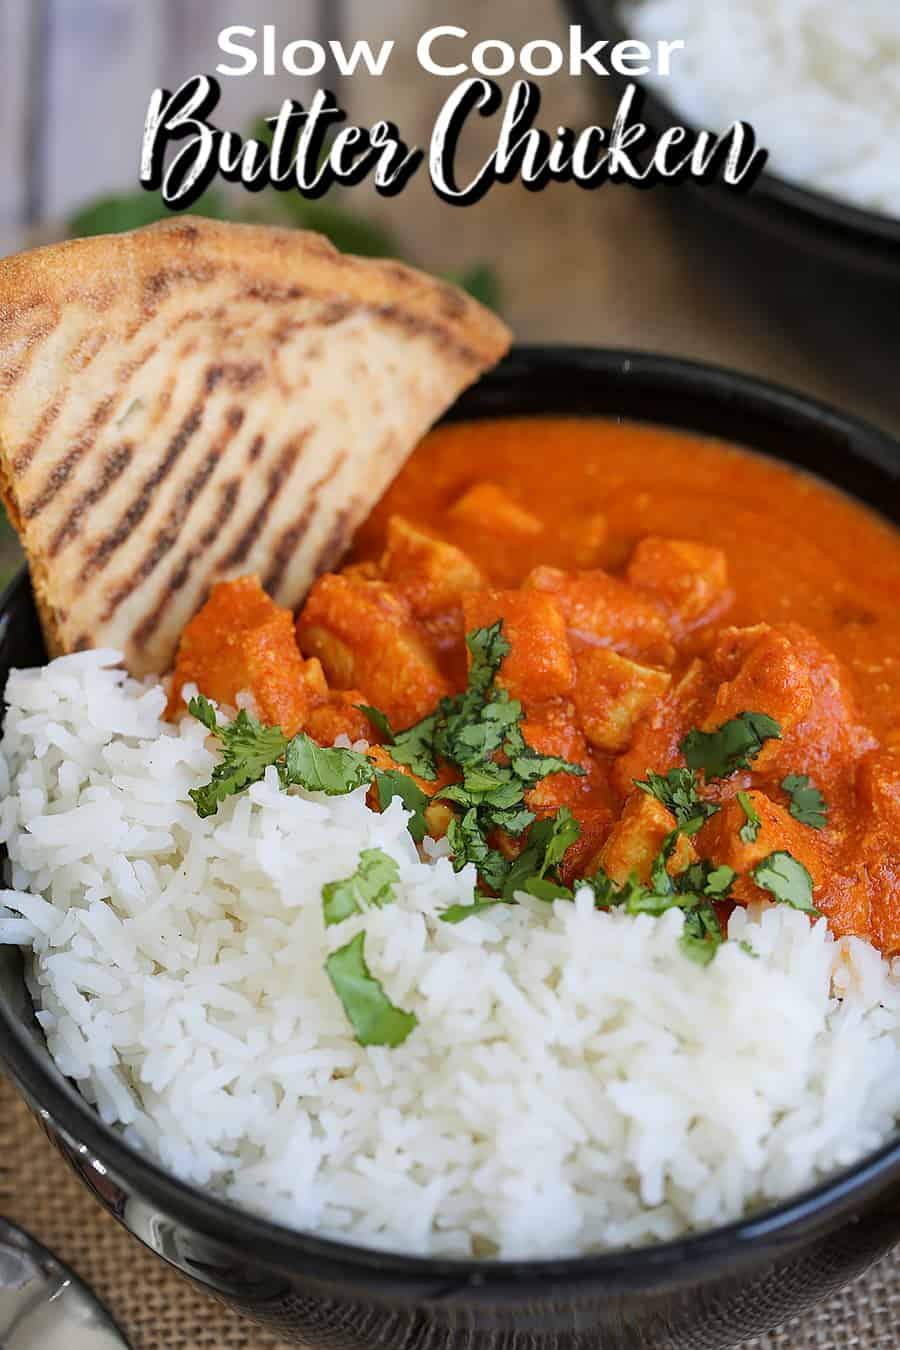 A plate of food with rice meat and bread, with Butter Chicken